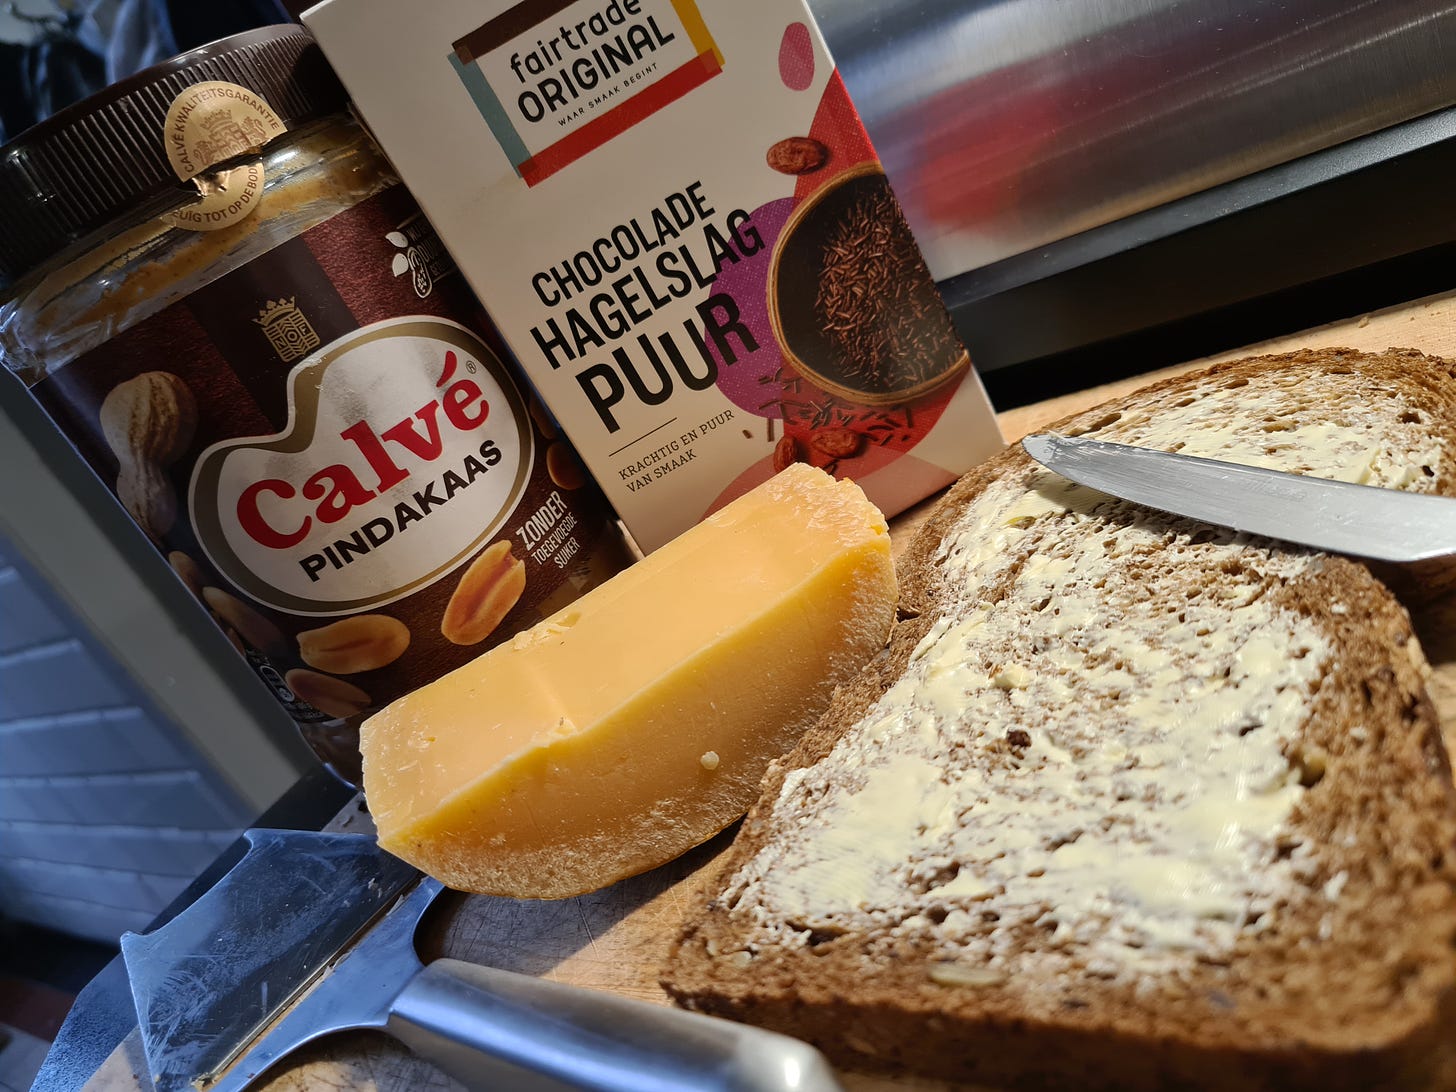 A slice of brown bread, buttered. Behind it, a pice of cheese with a cheese slicer next to it. Behind that, a jar of peanut butter and a box of hagelslag.